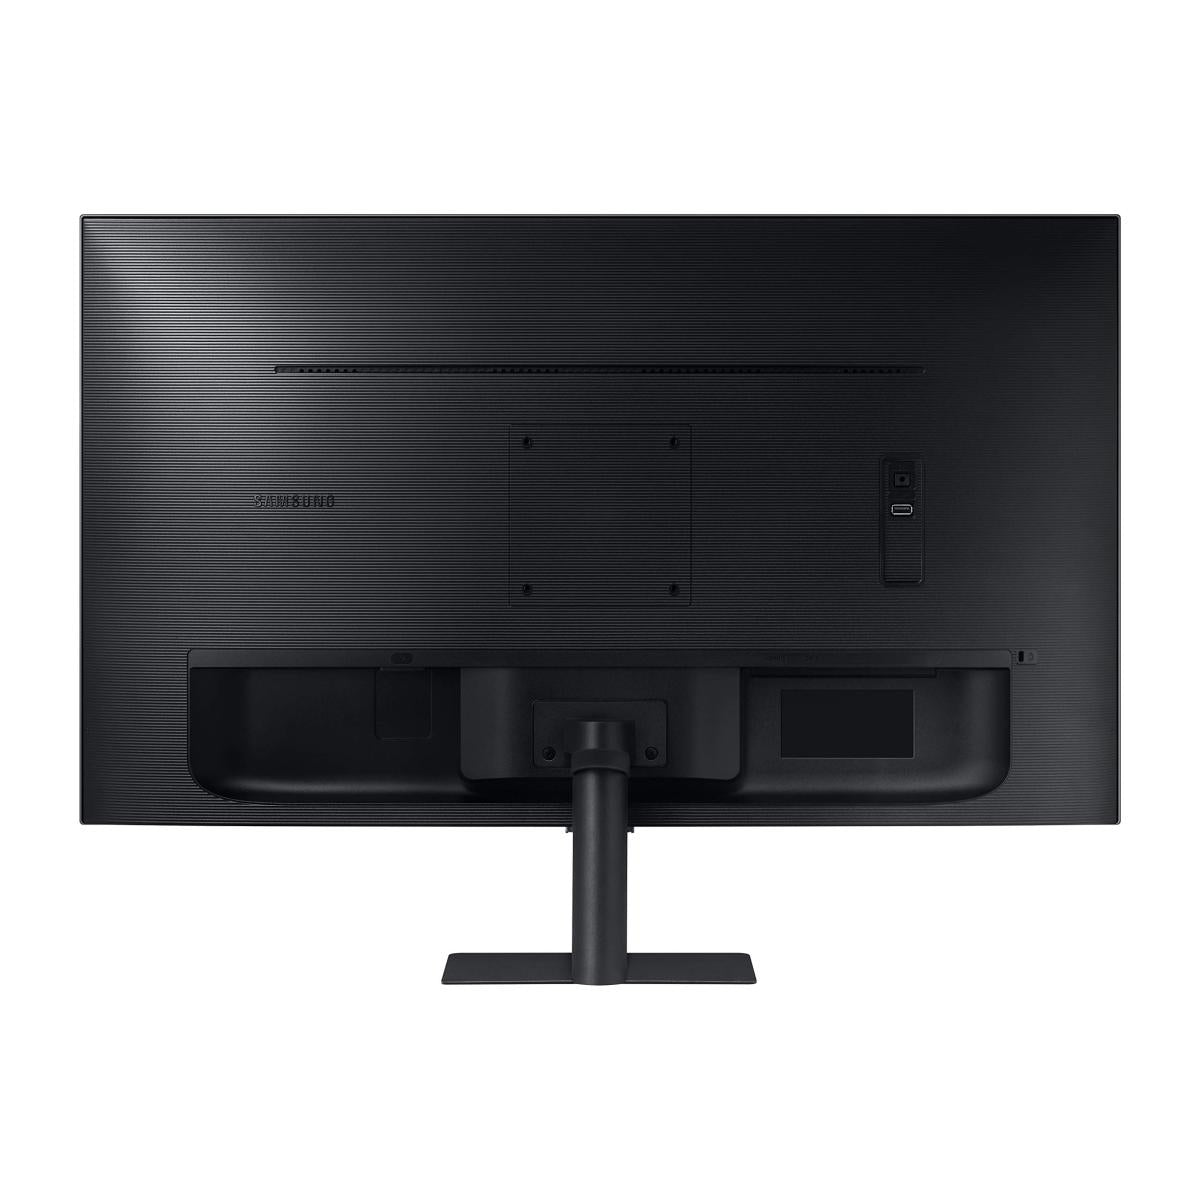 Samsung 27" UHD Monitor with IPS panel and HDR